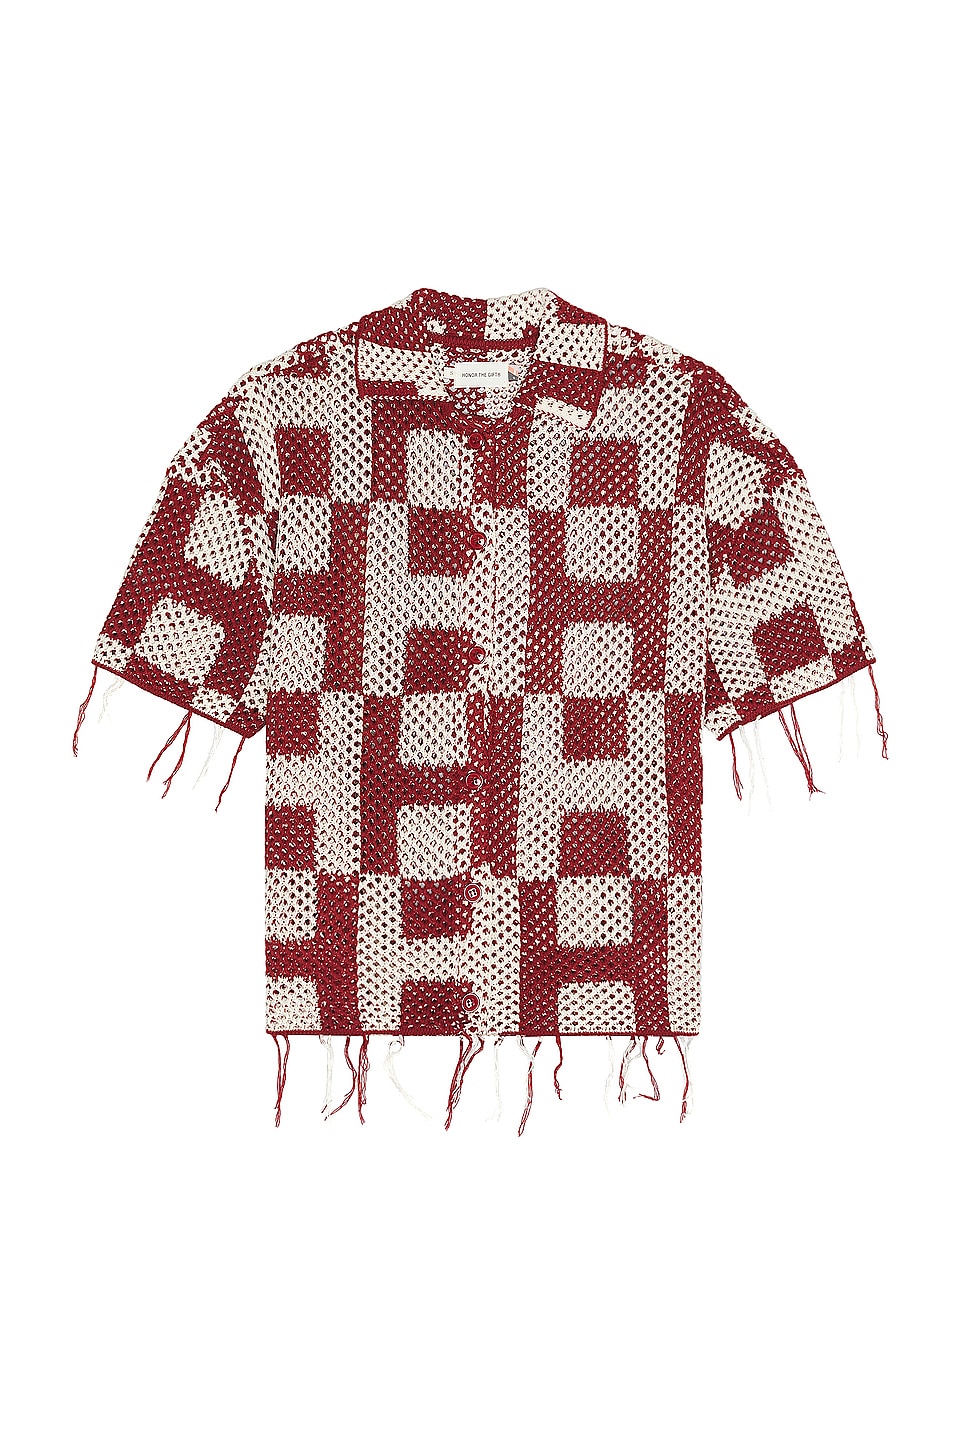 Image 1 of Honor The Gift A-spring Unisex Crochet Button Down Shirt in Brick